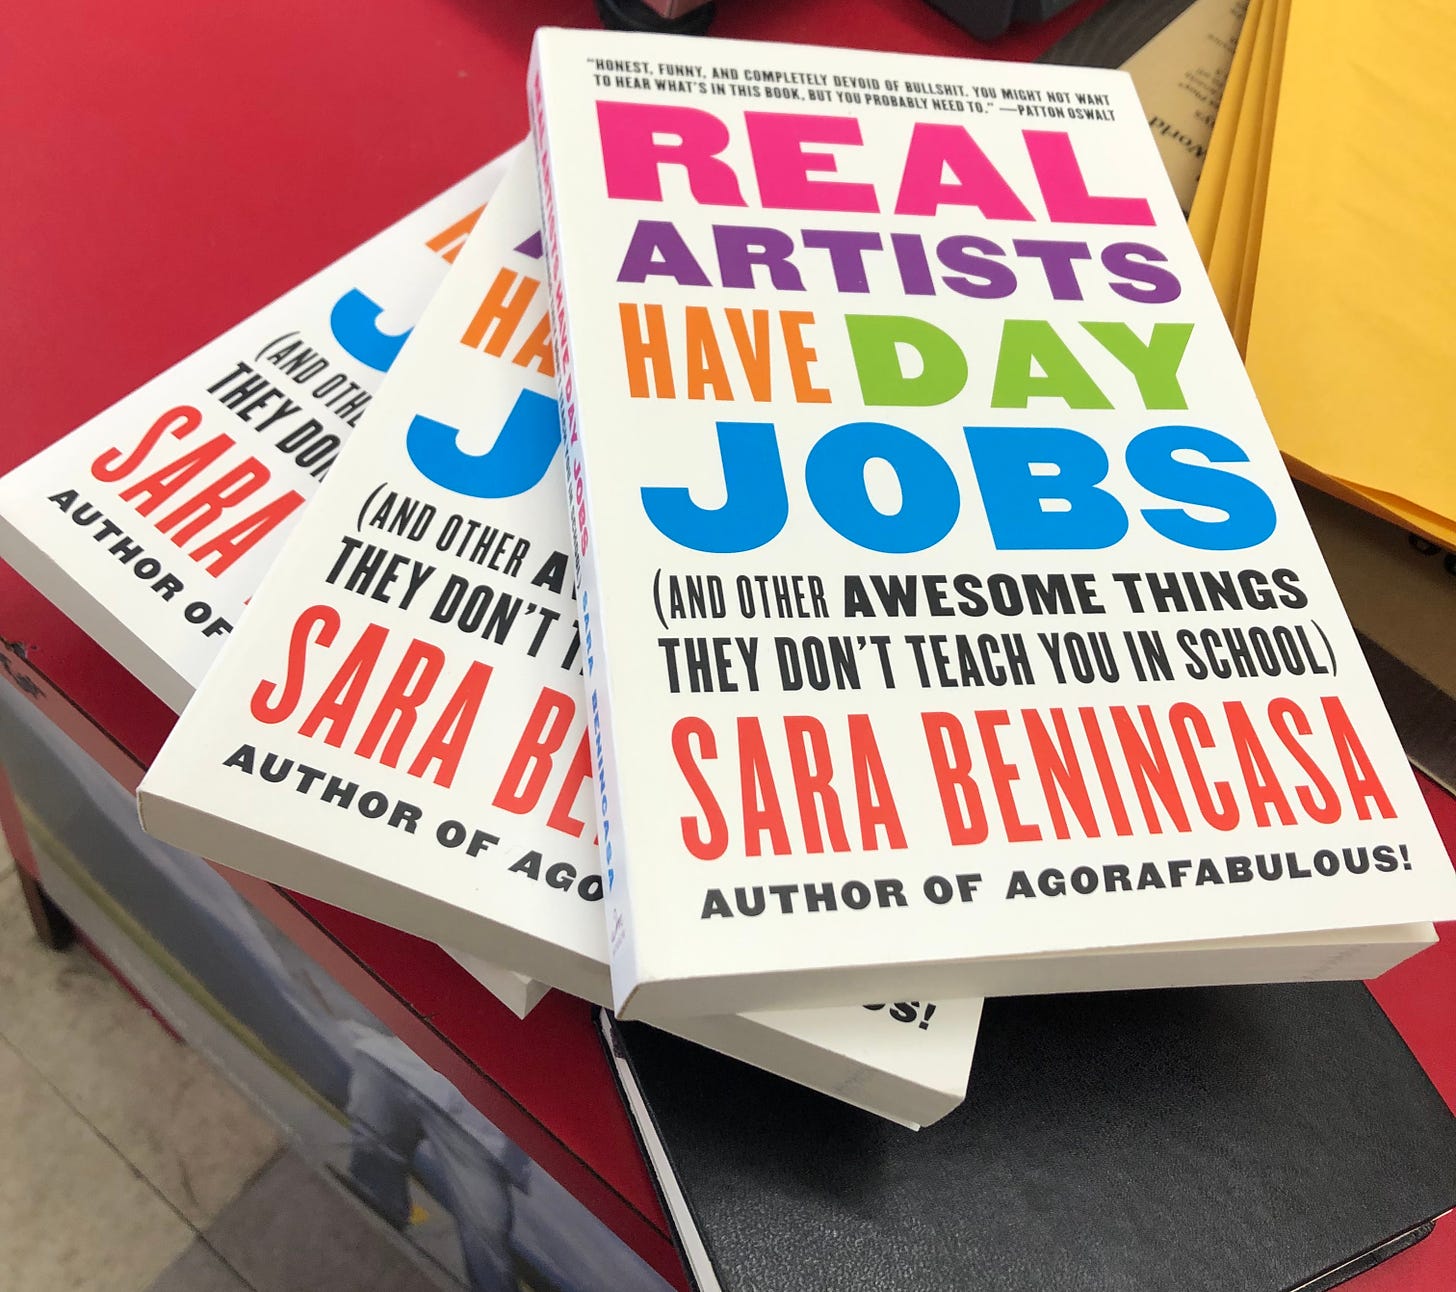 Three copies of "Real Artists Have Day Jobs" by Sara Benincasa, atop a red bookshop counter